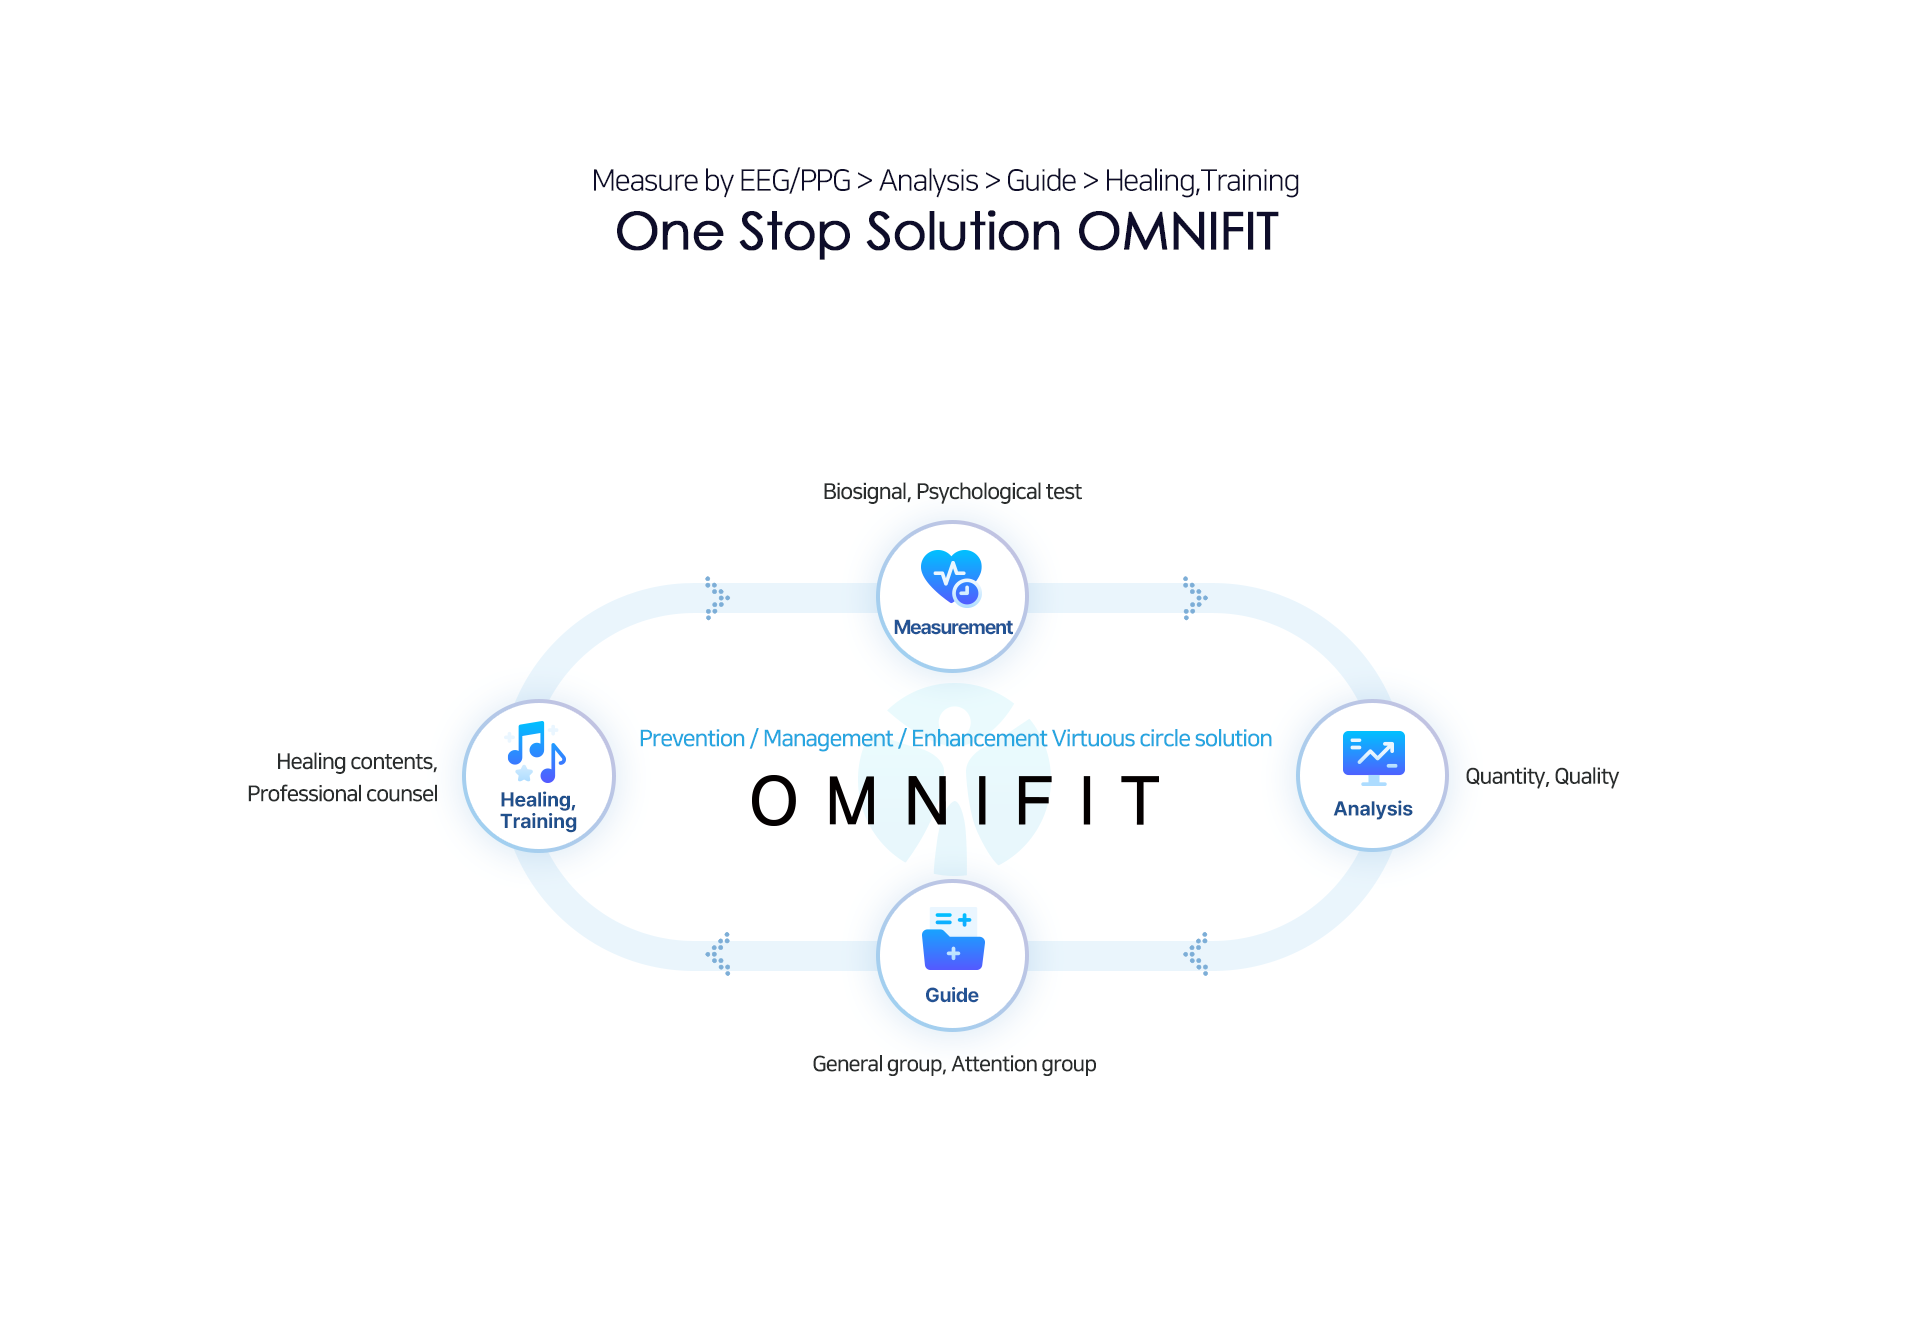 One Stop Solution OMNIFIT